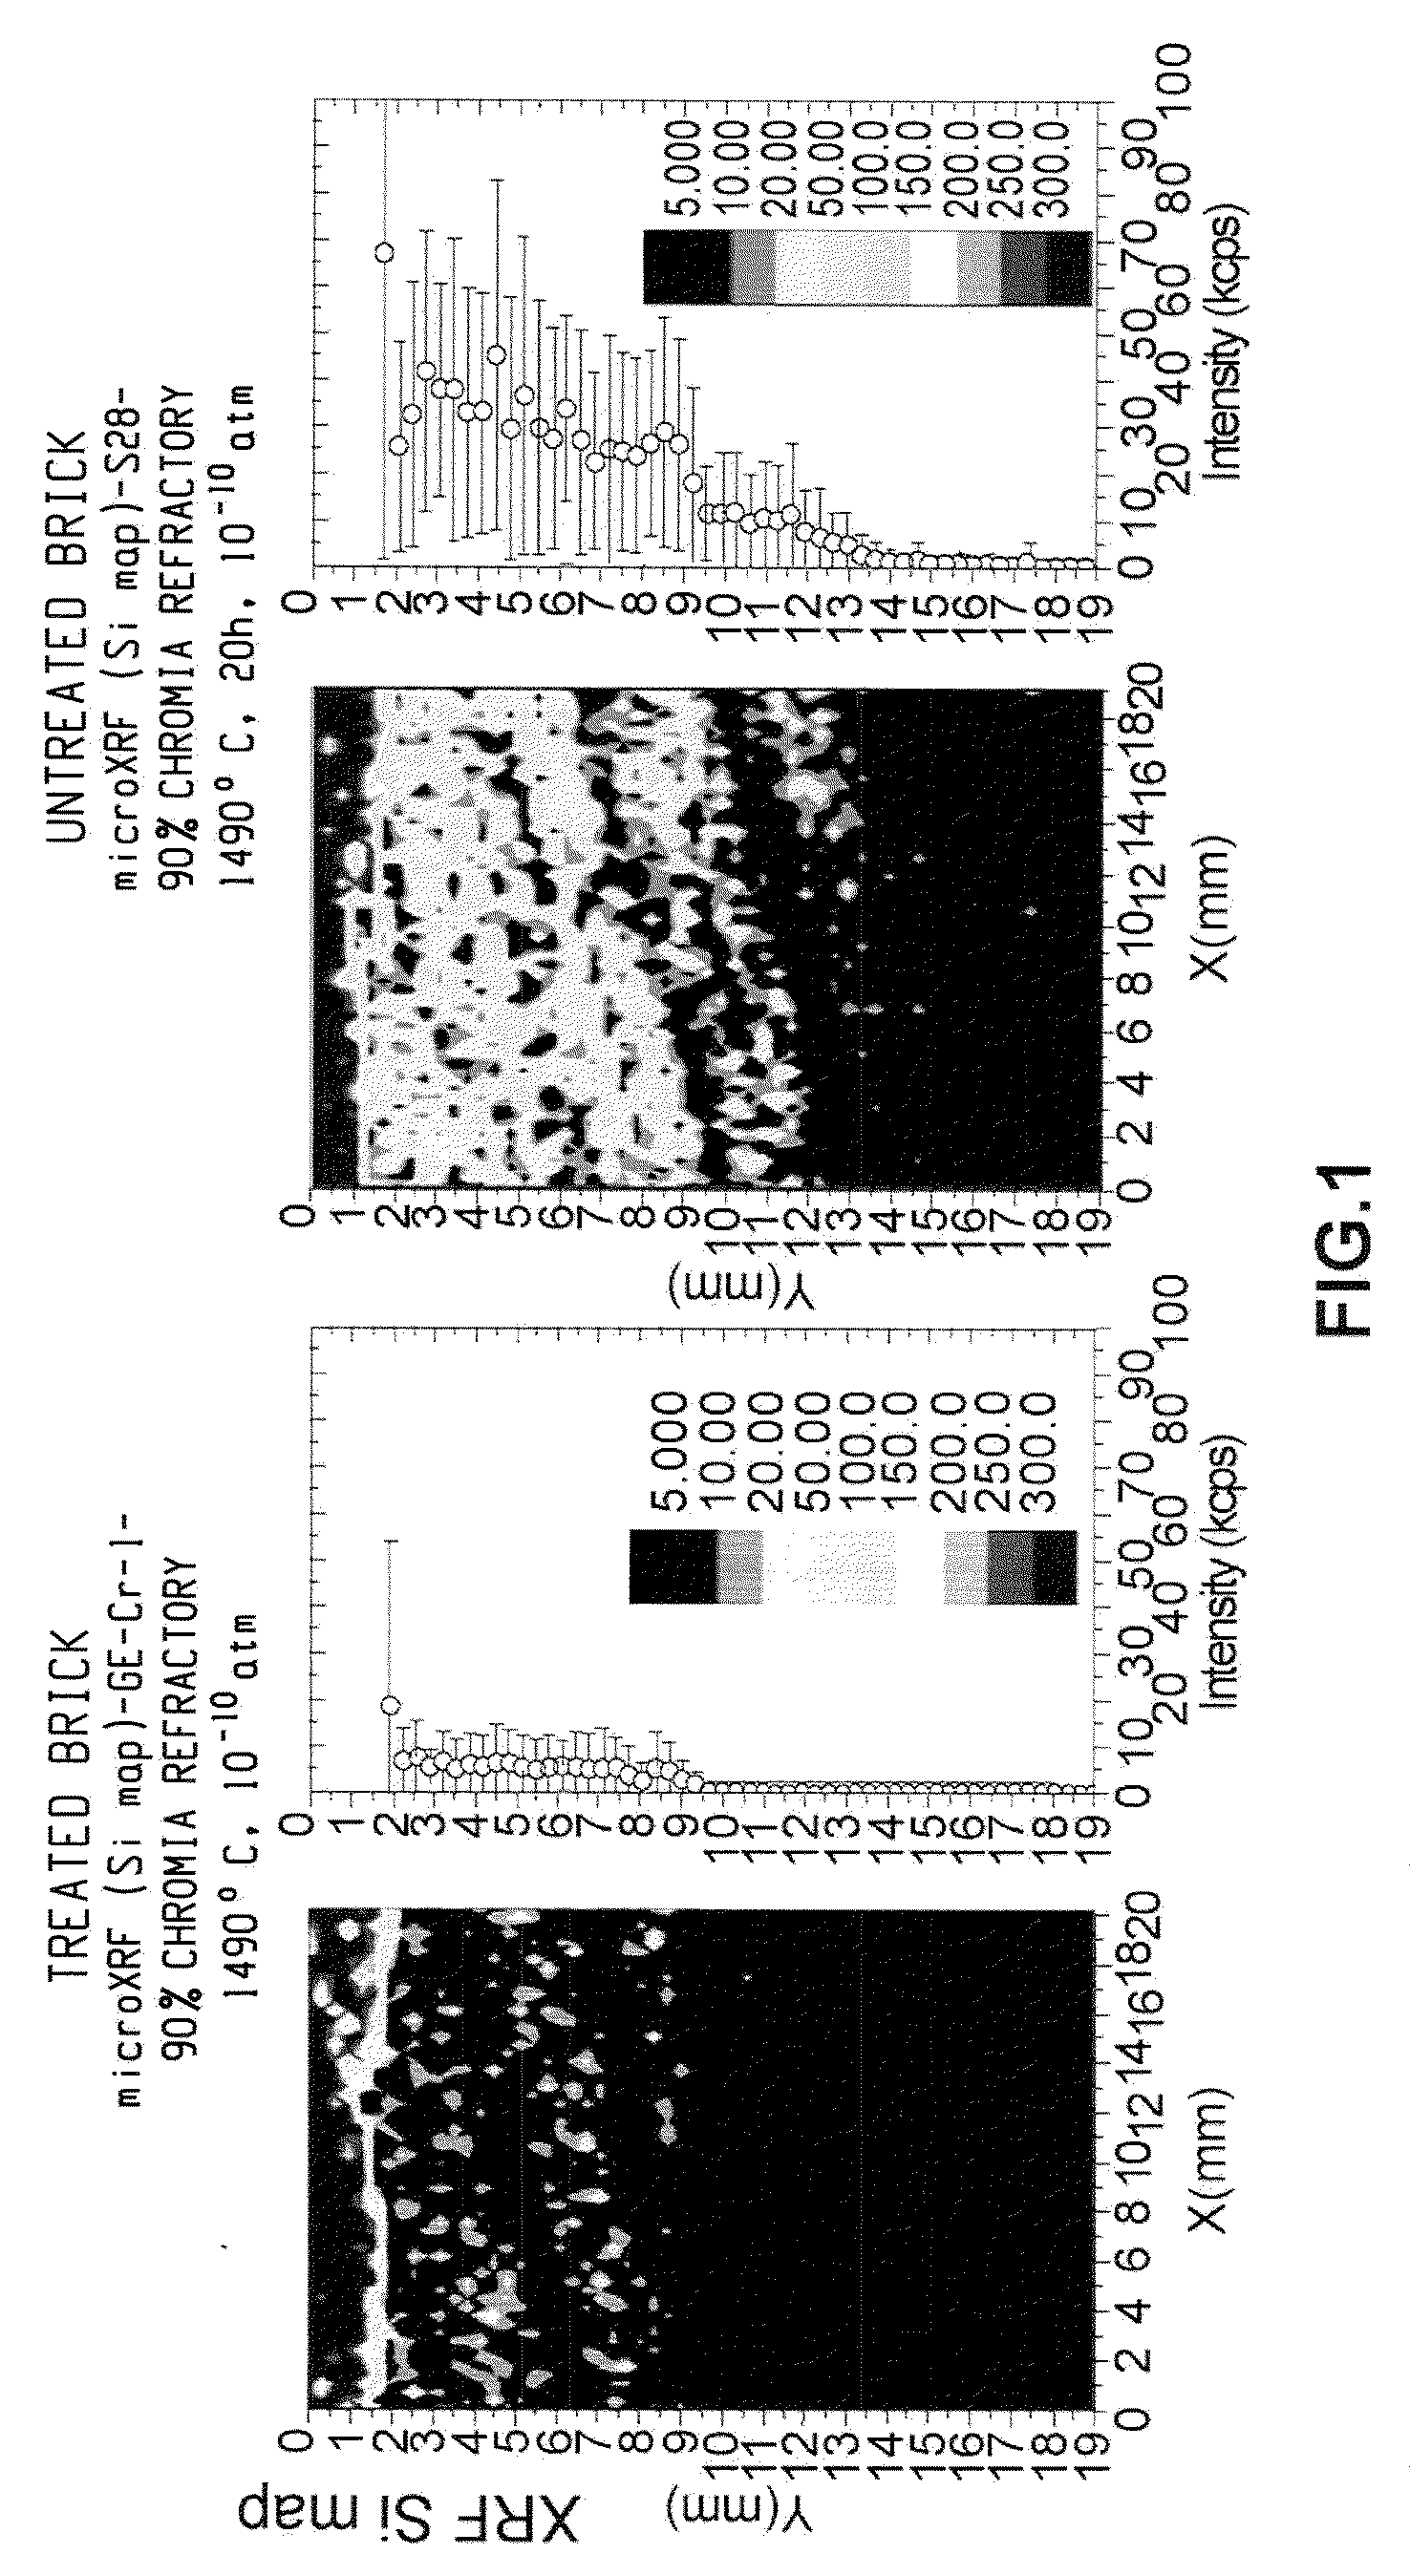 Treated refractory material and methods of making